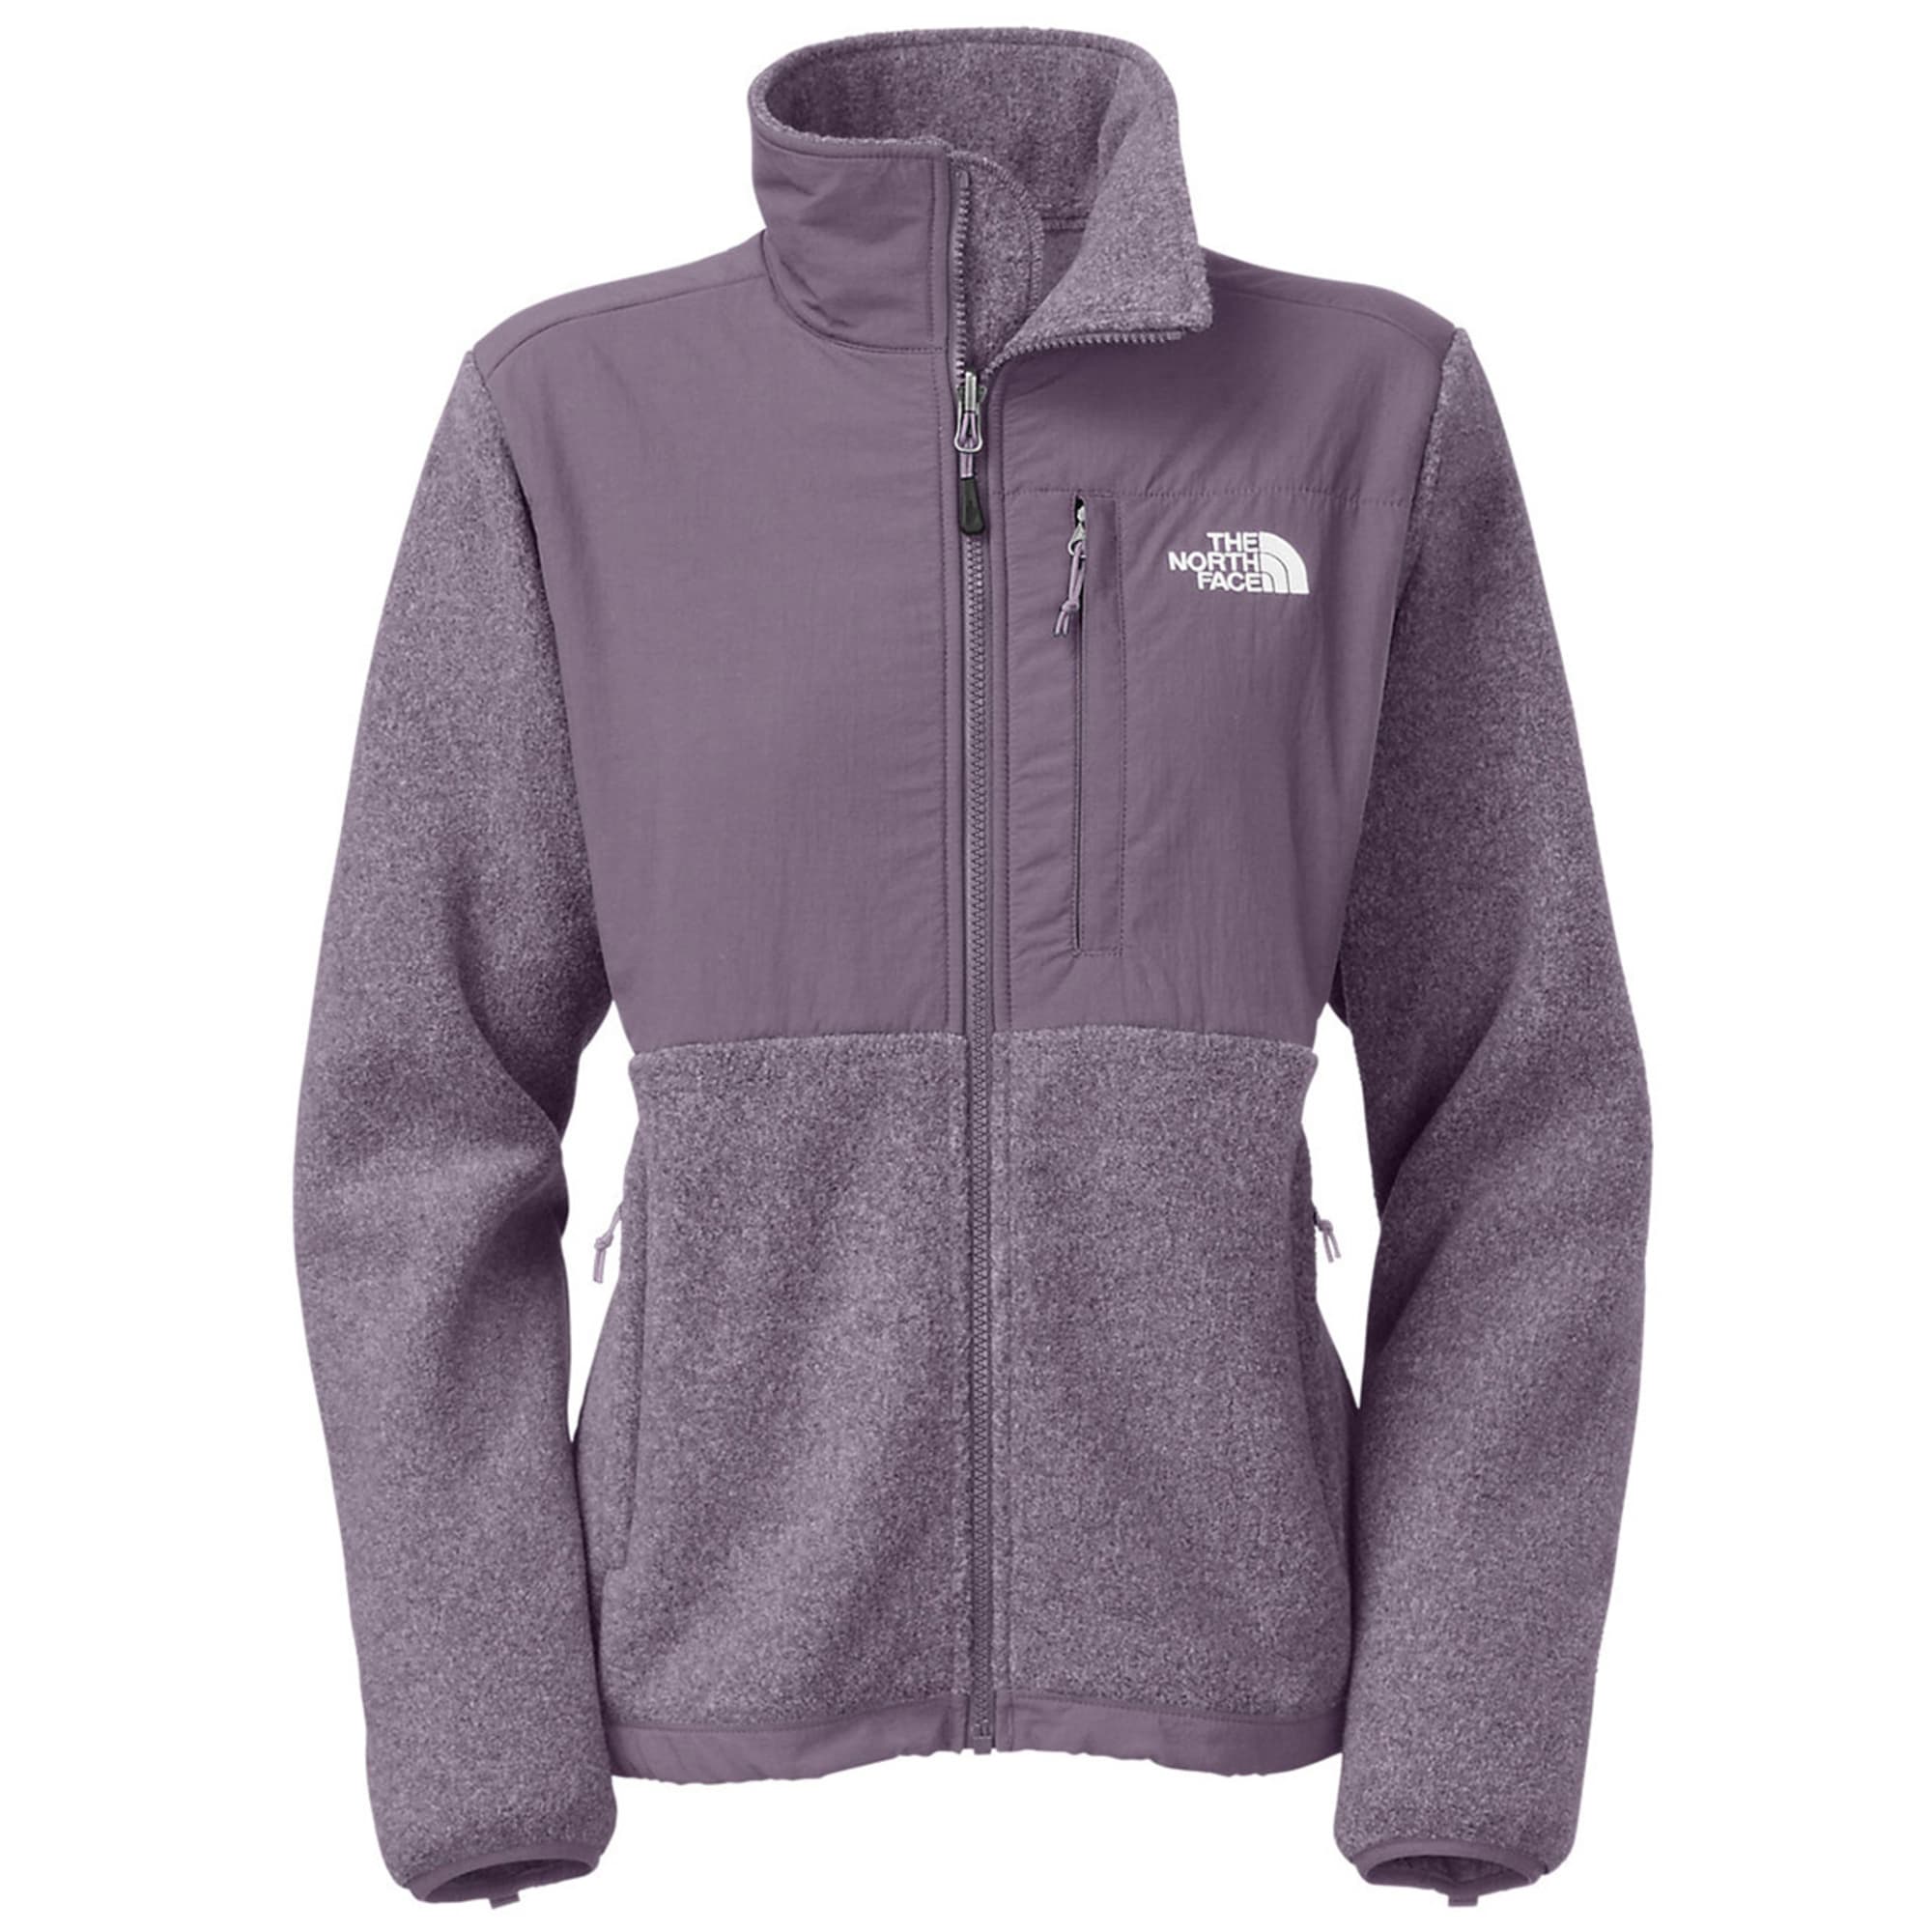 THE NORTH FACE Women's Denali Hoodie - Eastern Mountain Sports